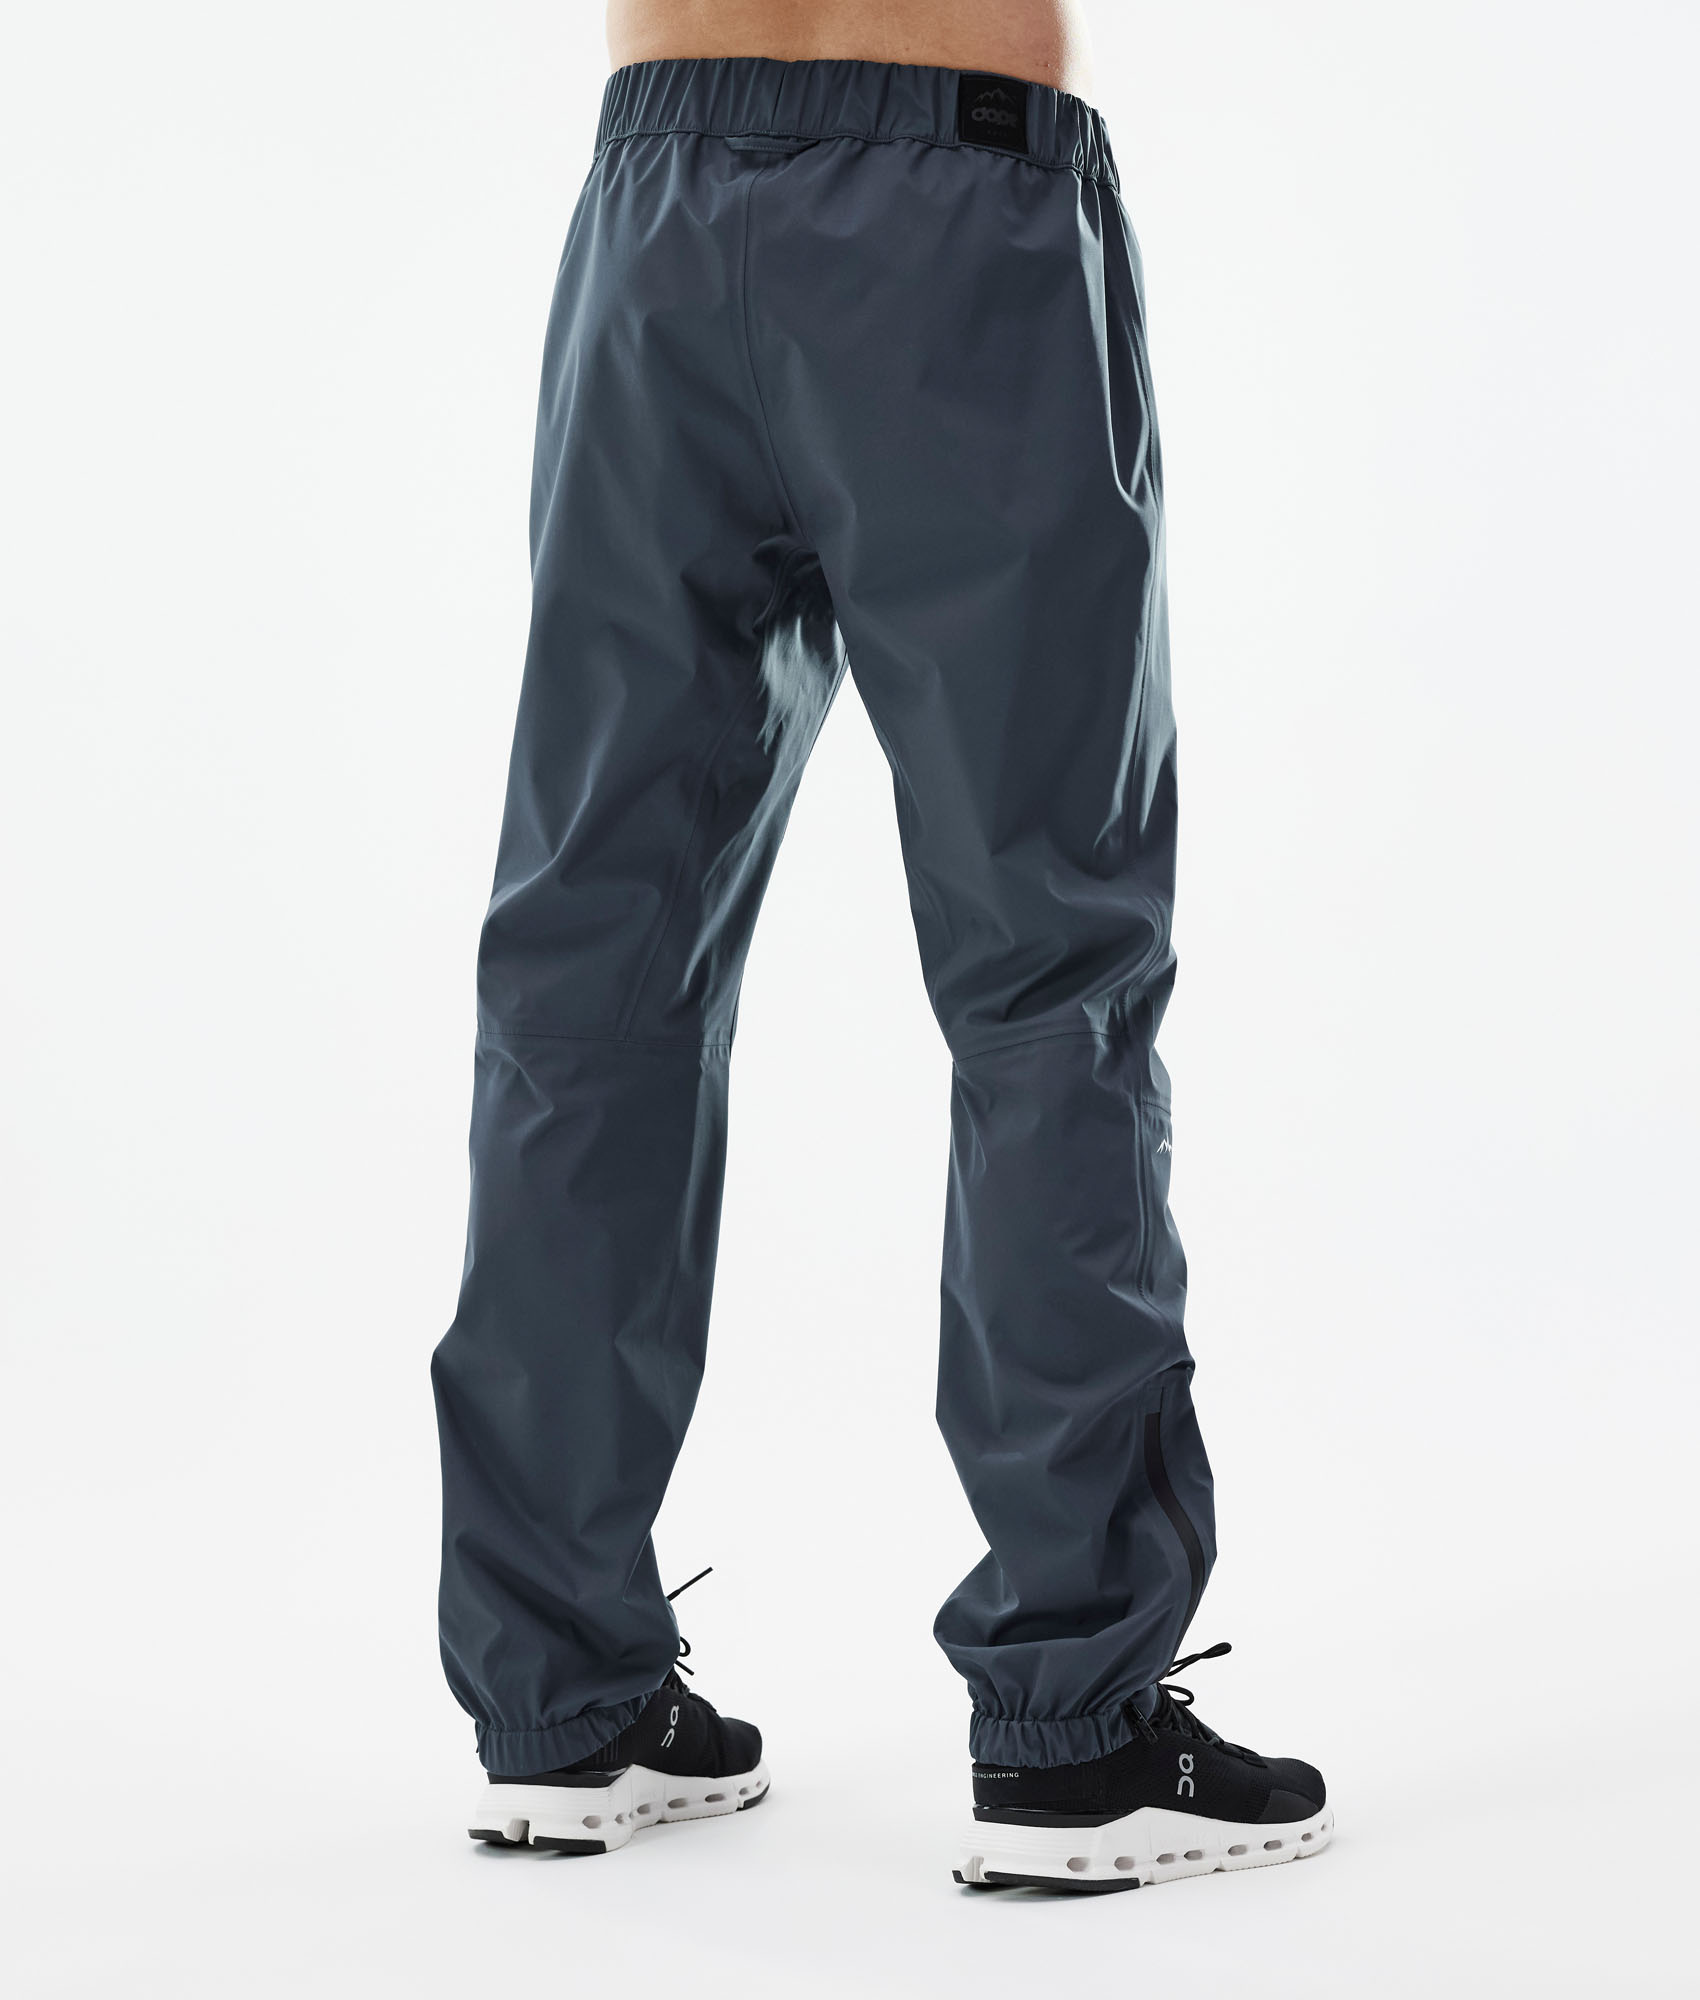 Men's Waterproof Hiking Over Trousers - NH500 Imper